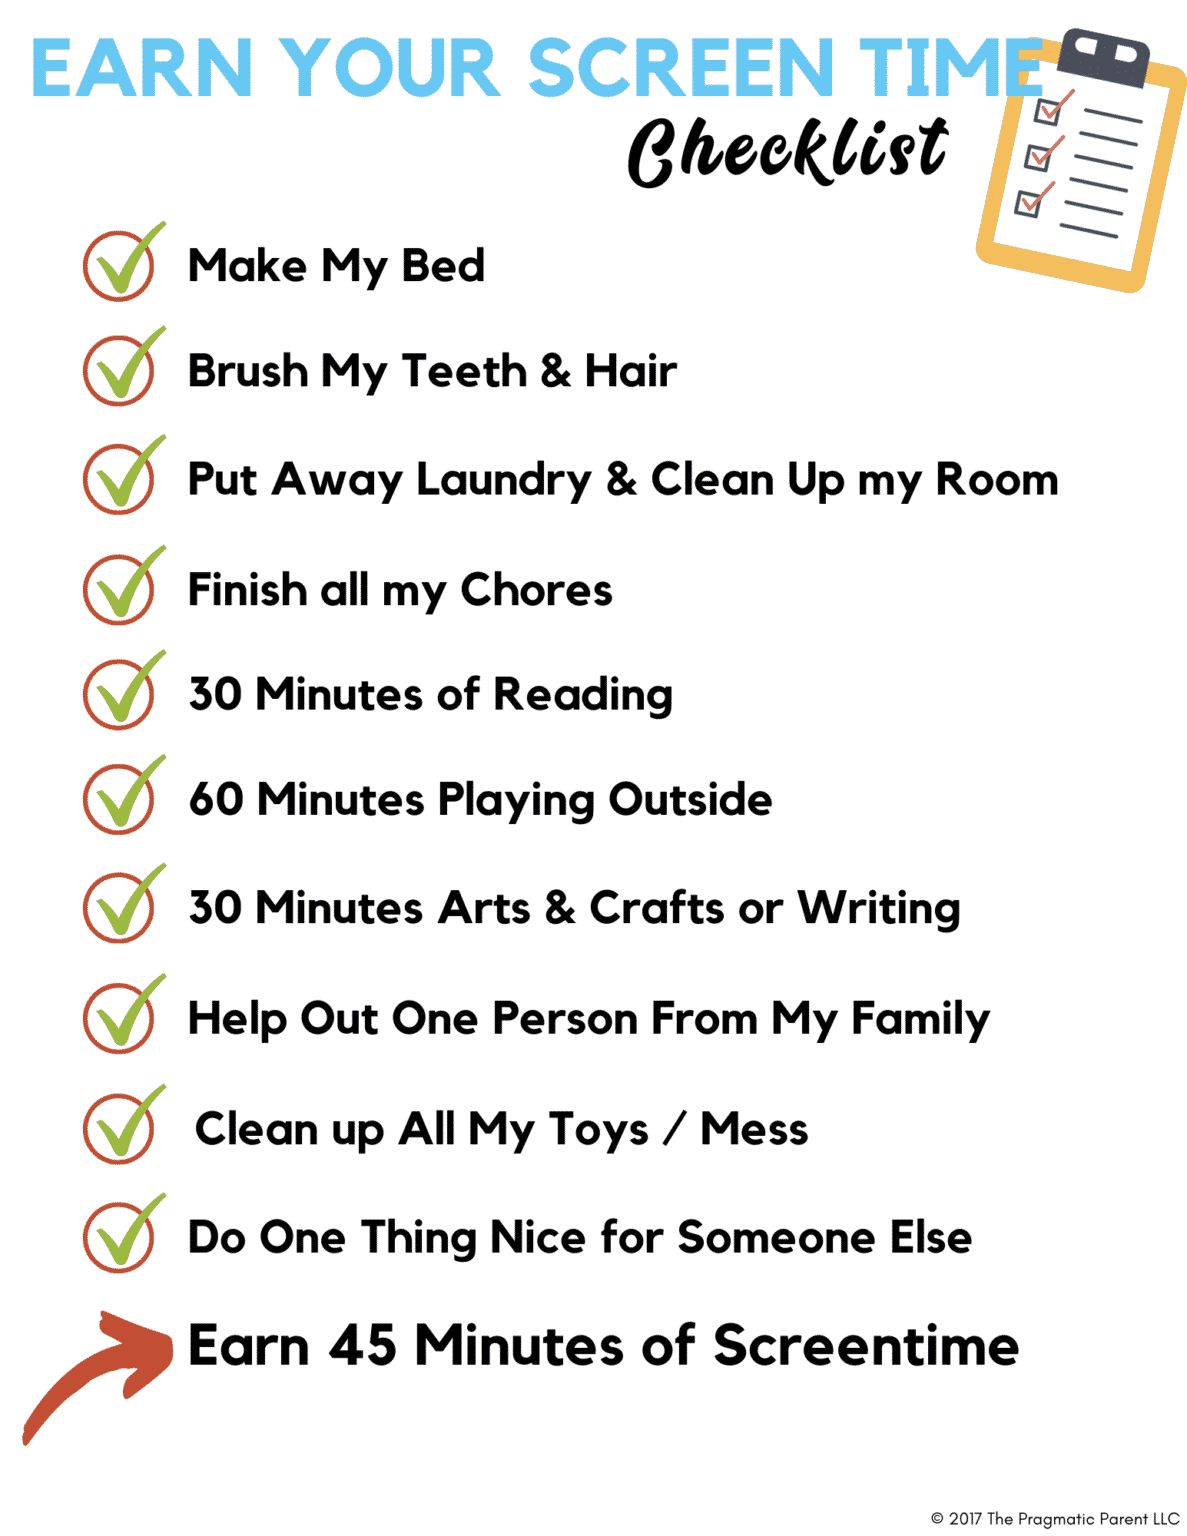 Printable Screen time Rules Checklist for Kids (PDF)